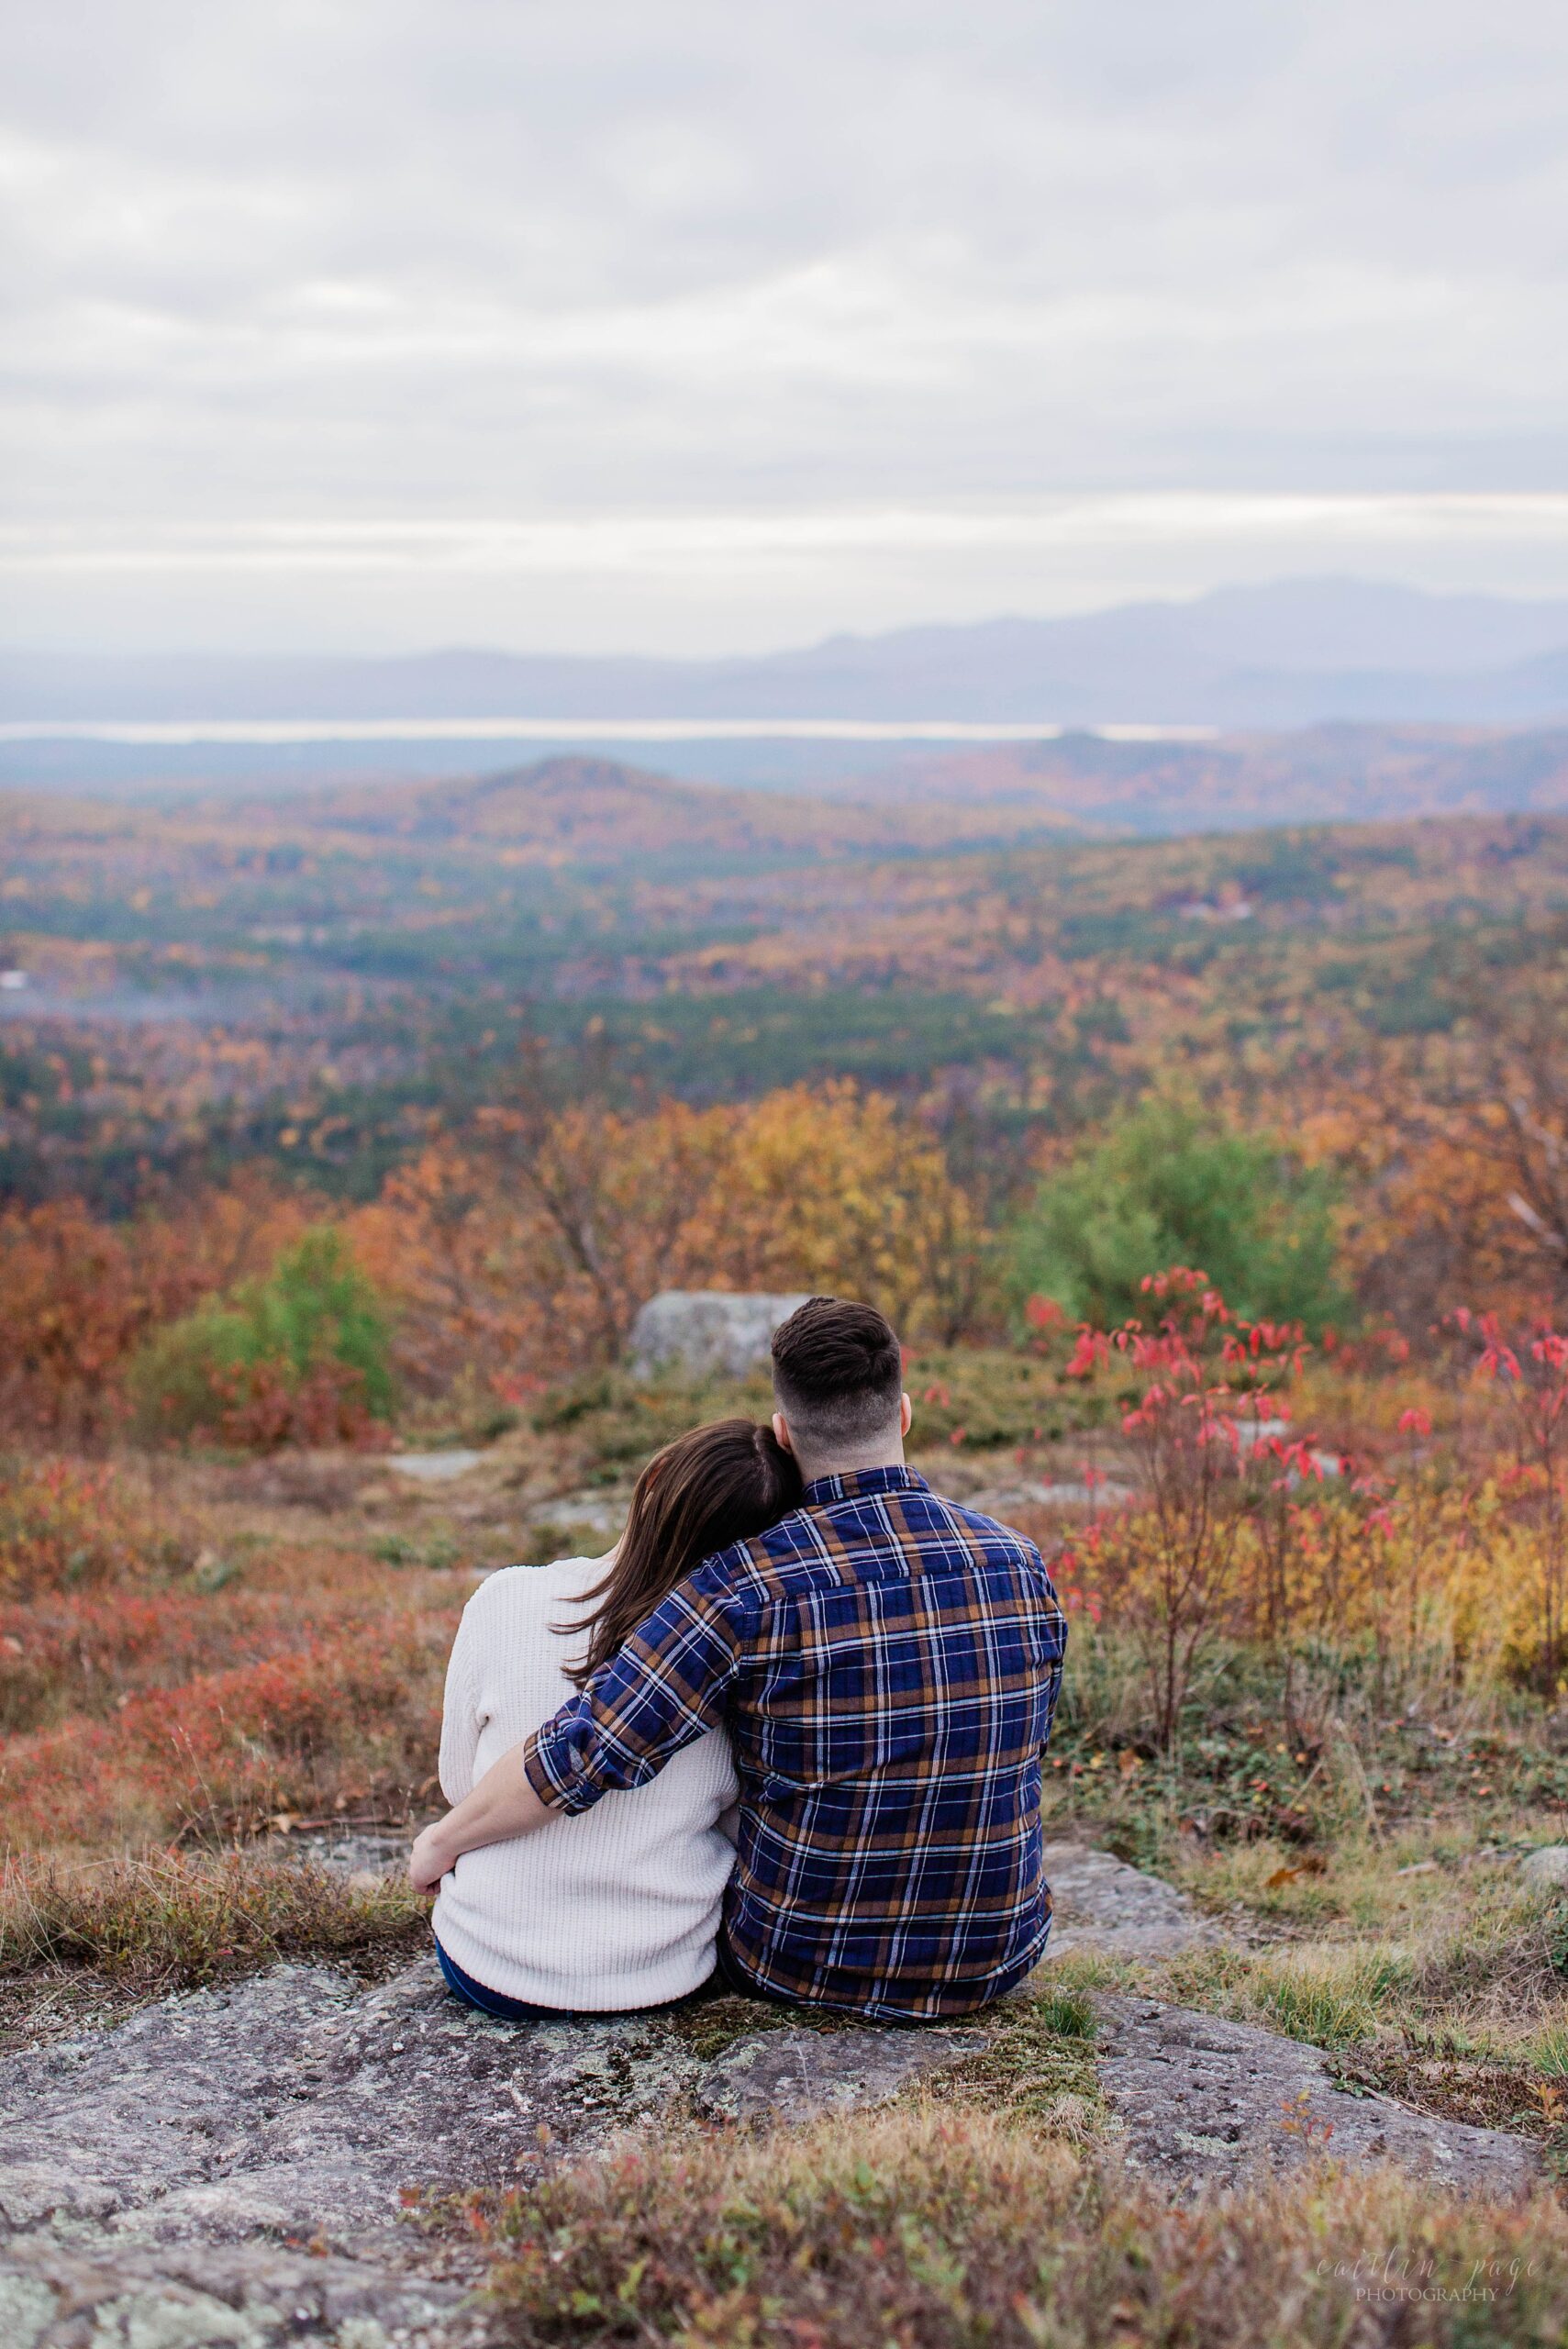 Couple sitting together looking out at view